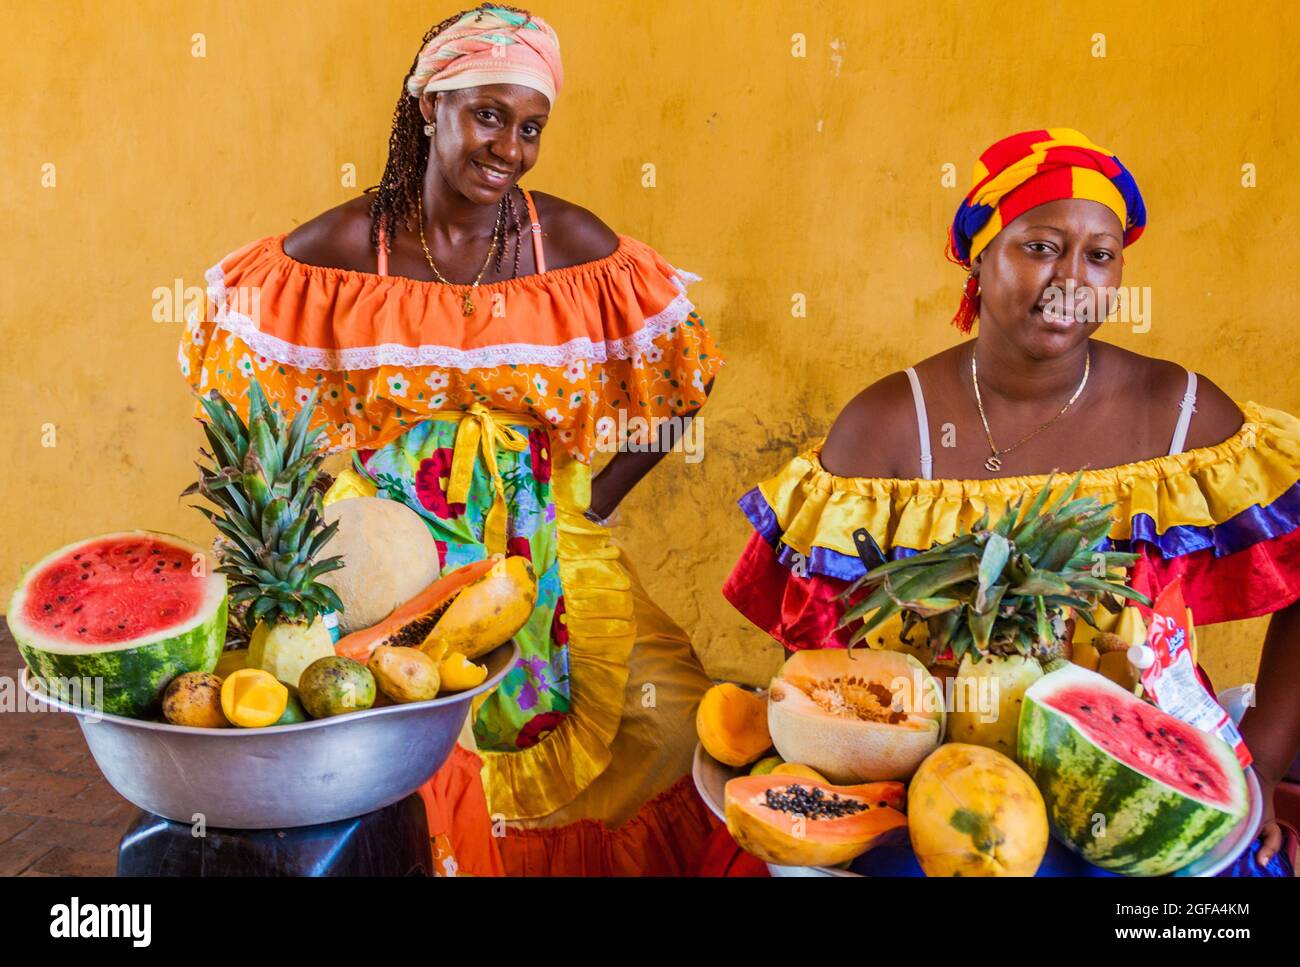 CARTAGENA DE INDIAS, COLOMBIA - AUG 28, 2015: Women wearing traditional costume sell fruits in the center of Cartagena. Stock Photo